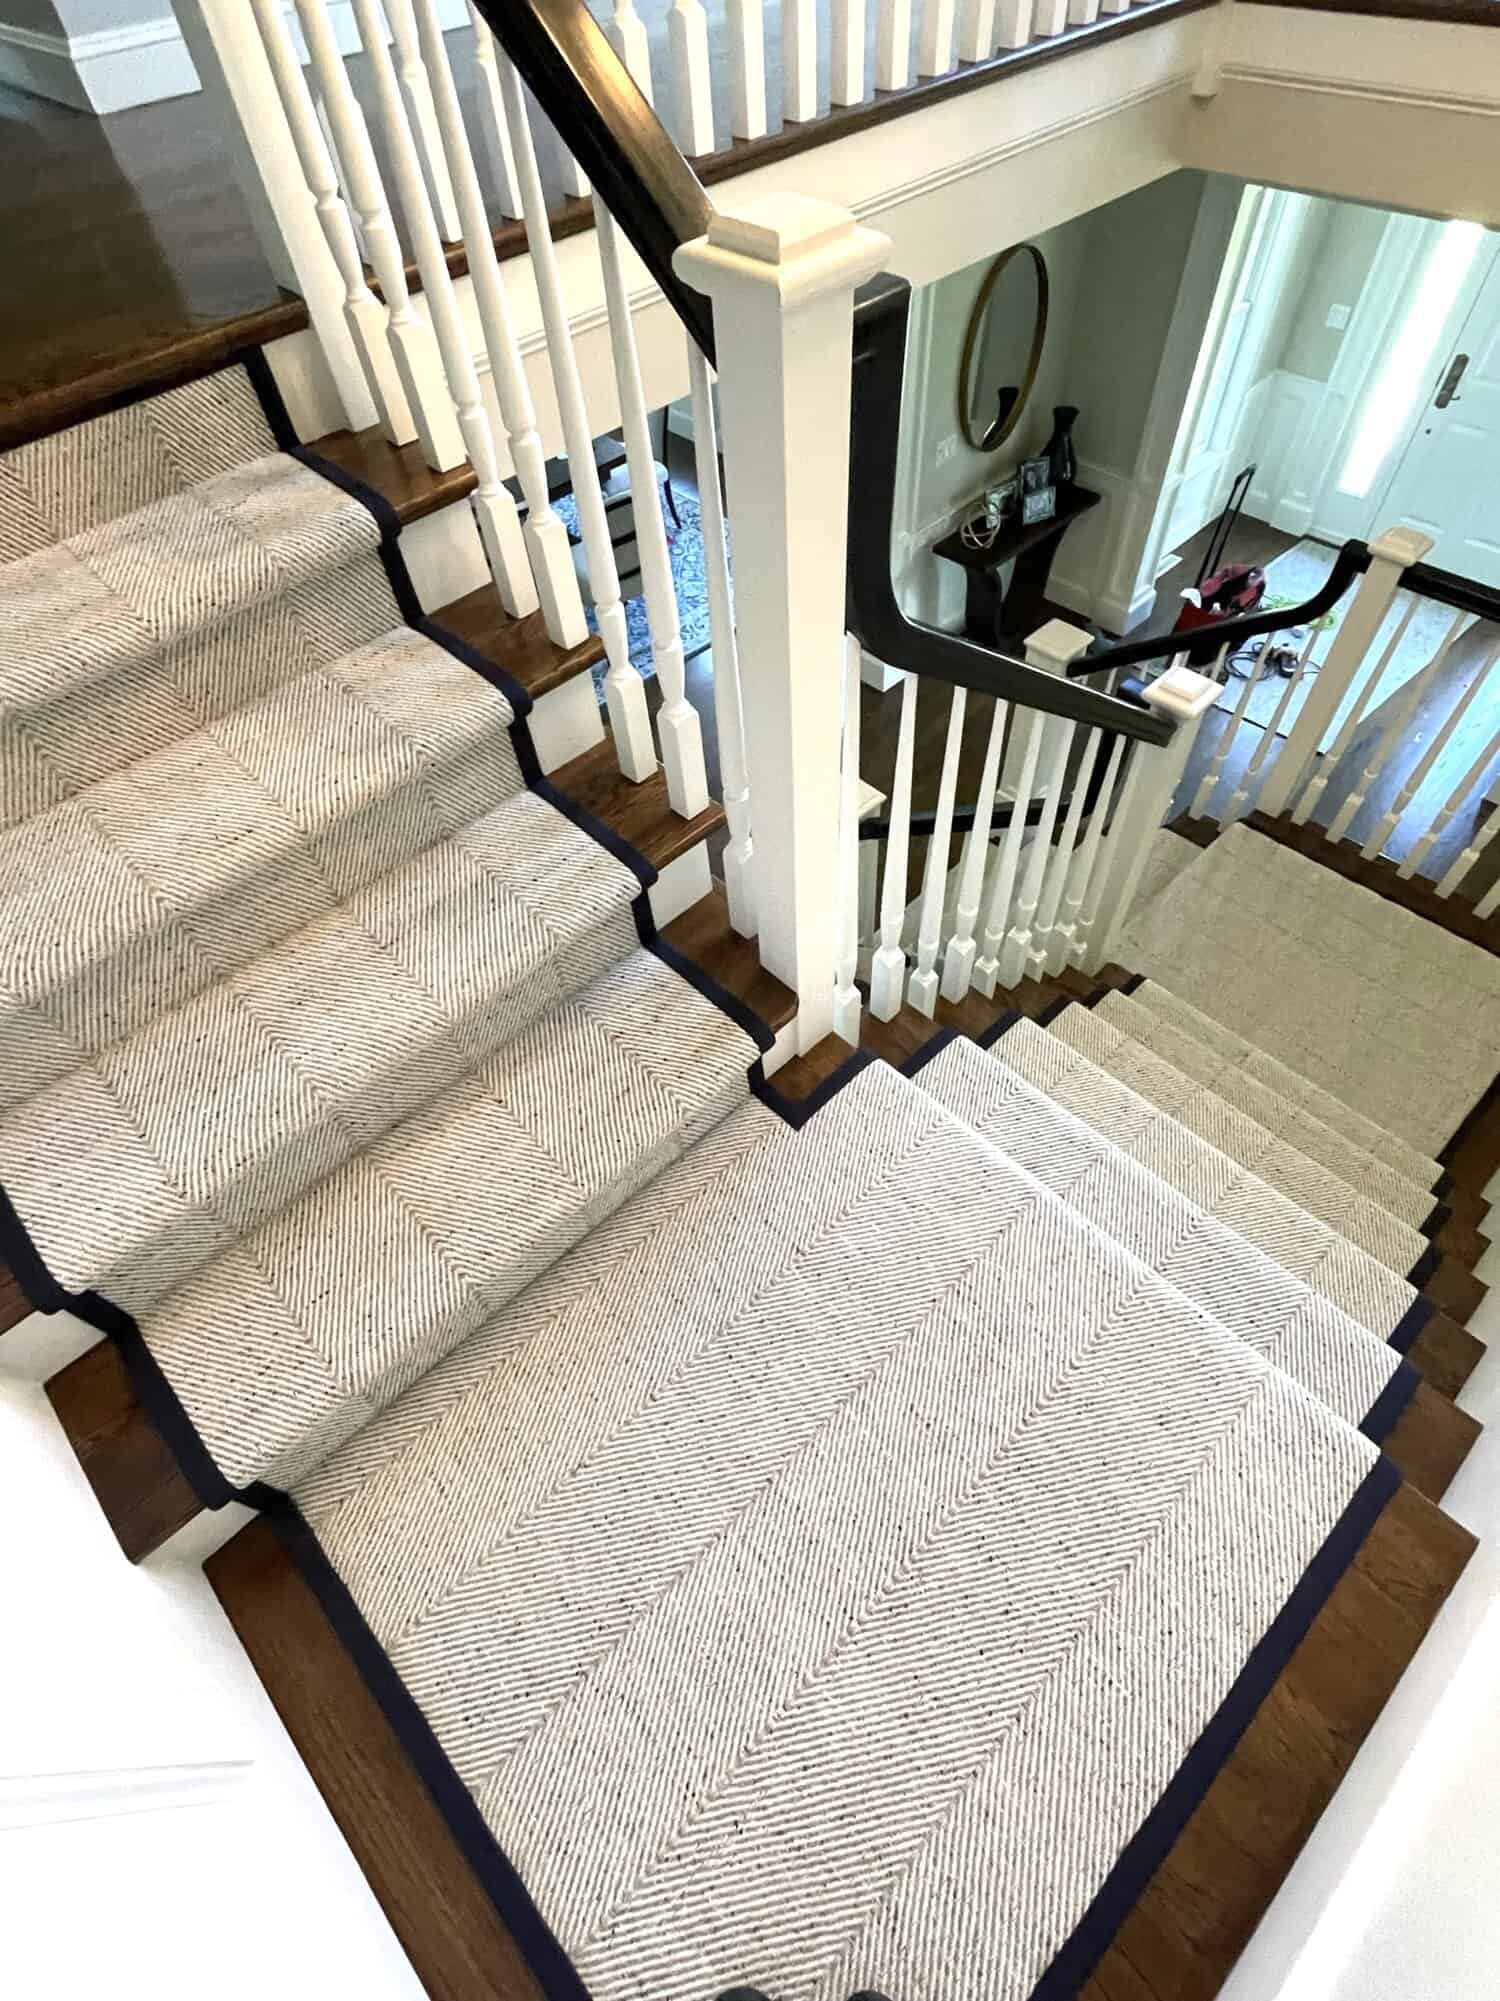 Cervecería micrófono Recuerdo Carpet Buying 101 – Choosing the Best Carpeting for Your Stairs